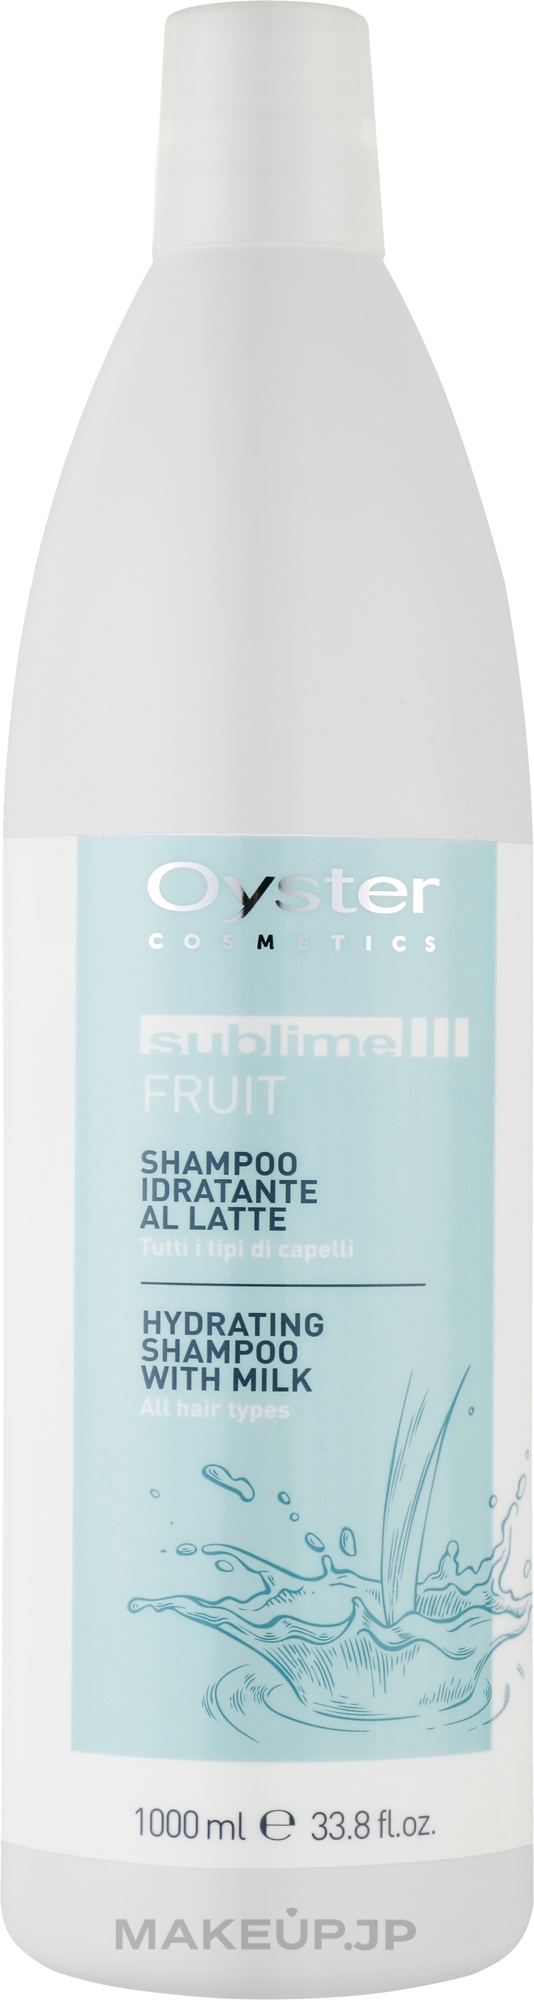 Moisturising Shampoo with Milk Proteins - Oyster Cosmetics Sublime Fruit Hydrating Shampoo Whith Milk — photo 1000 ml